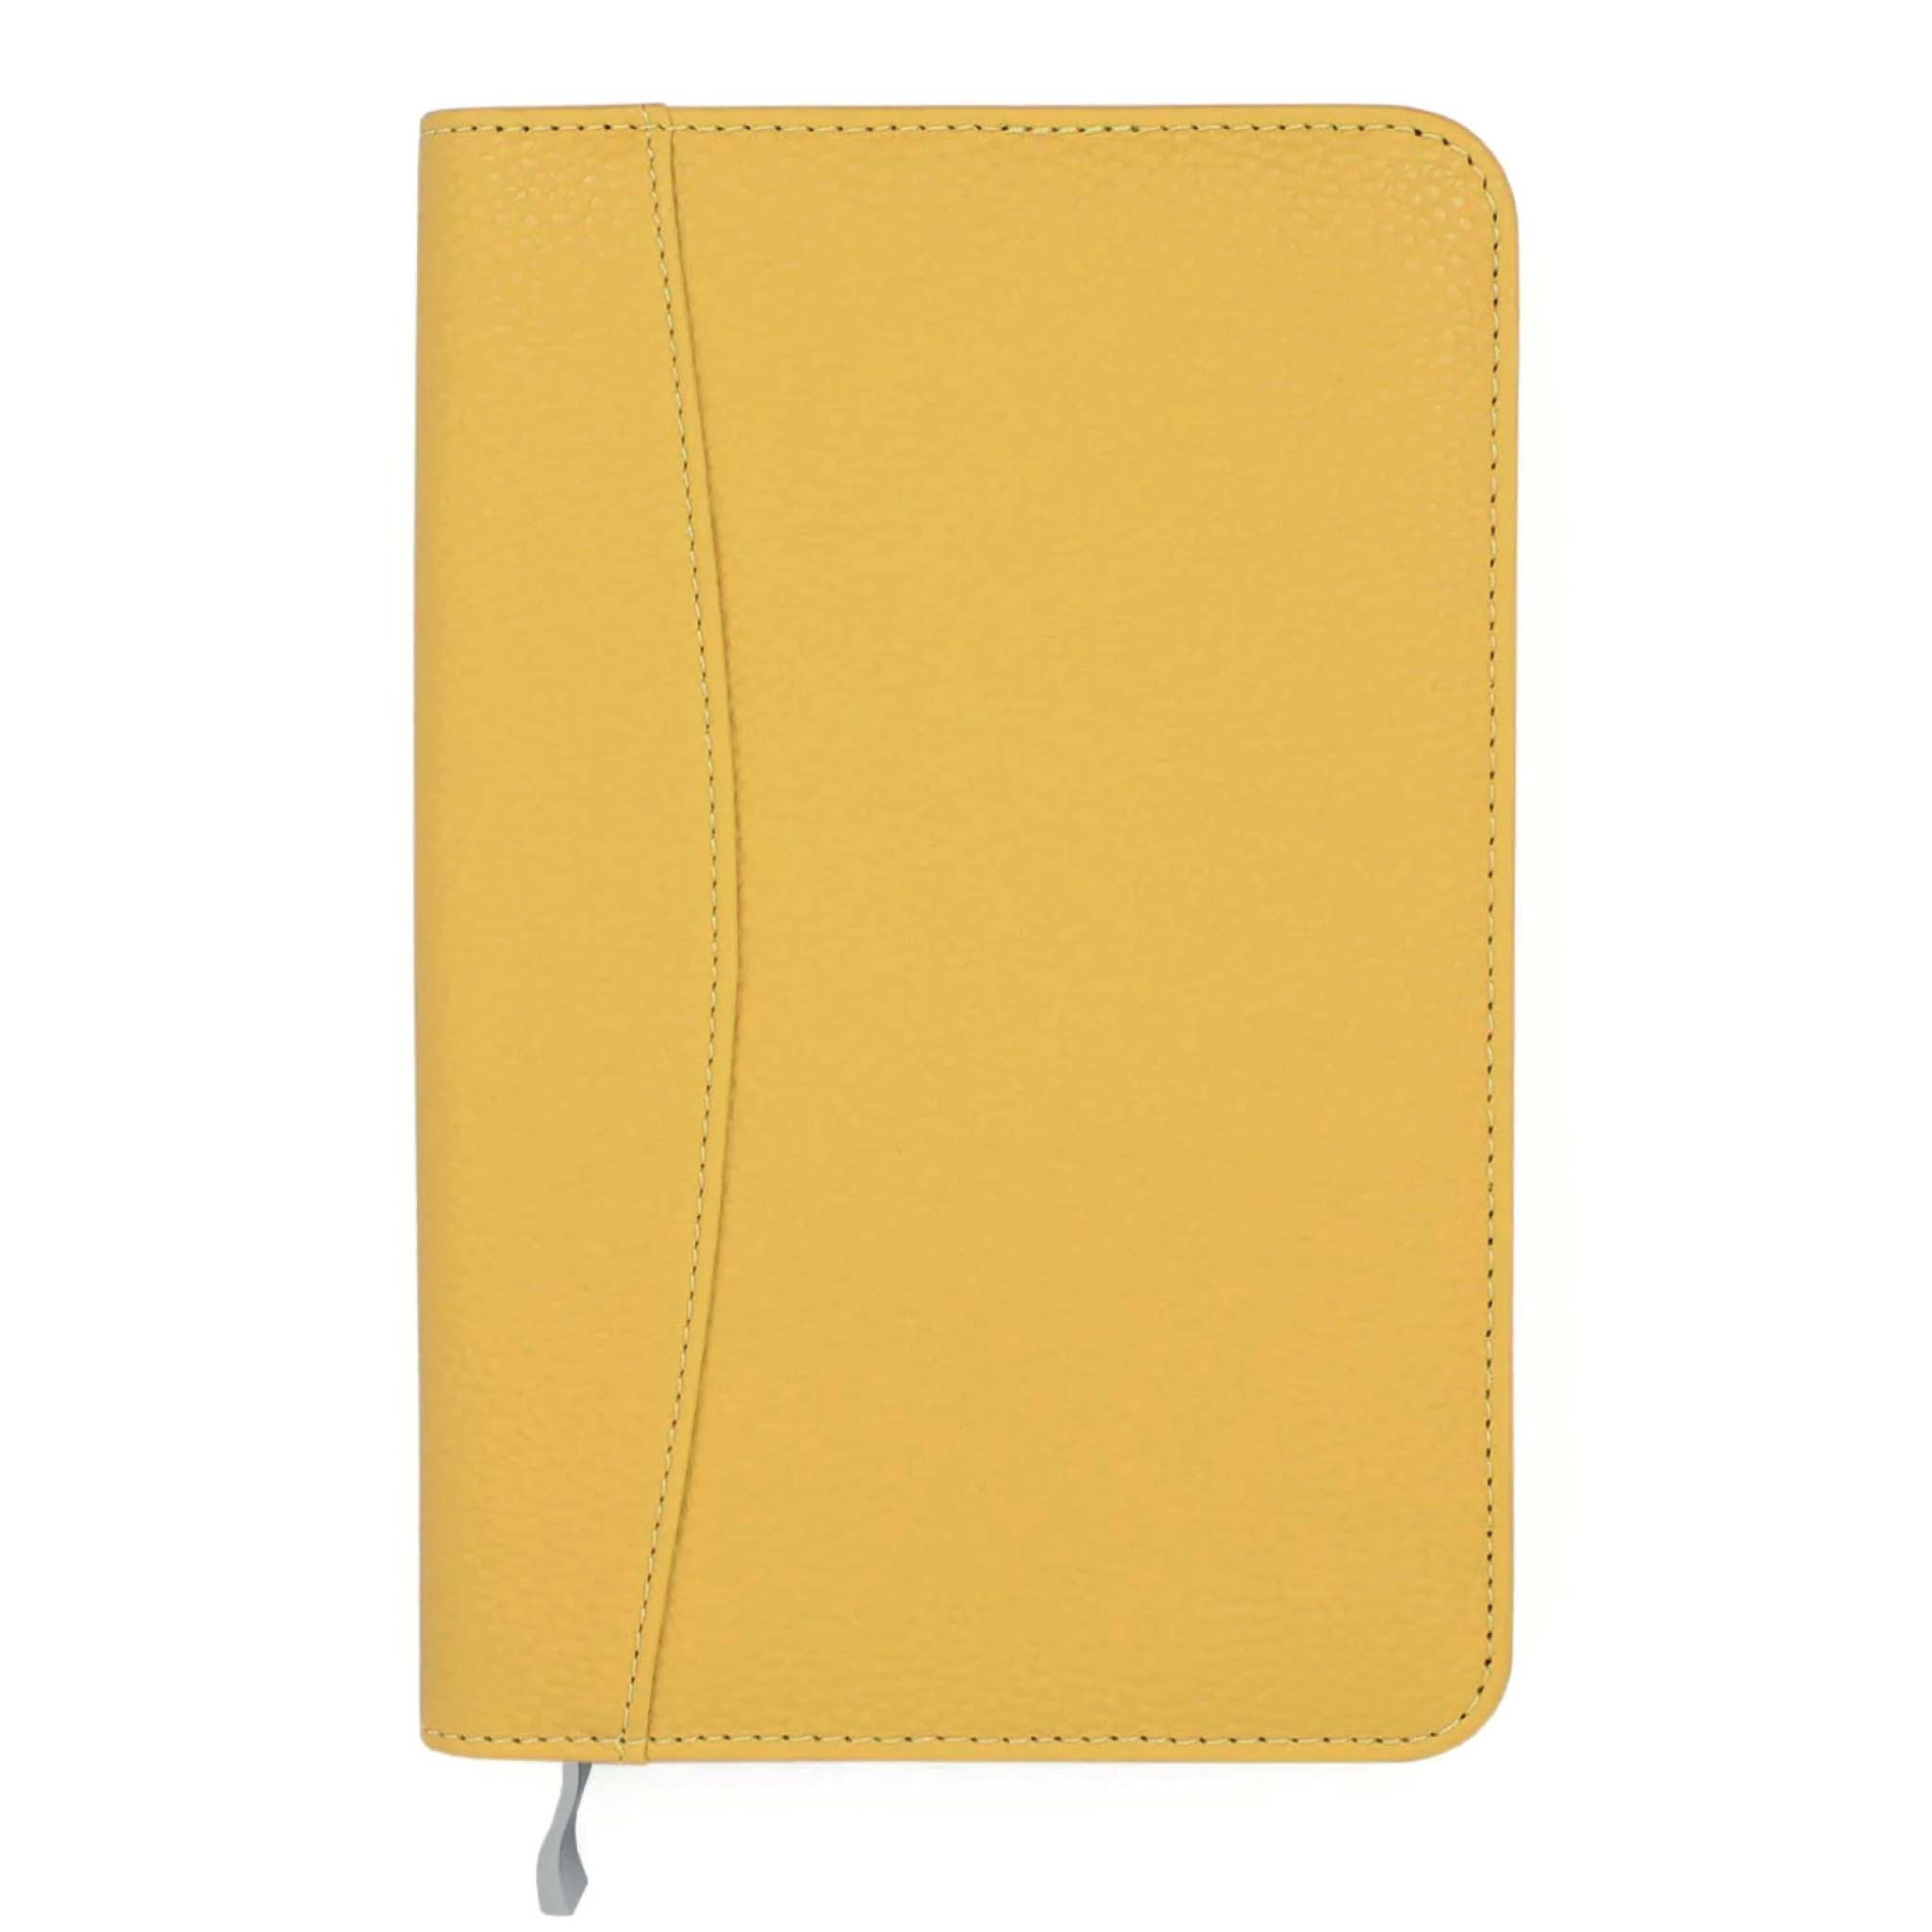 An image of Pocket Life Book Diary Cover I Full-Zip Slimline Cover with Pocket Mustard Yello...